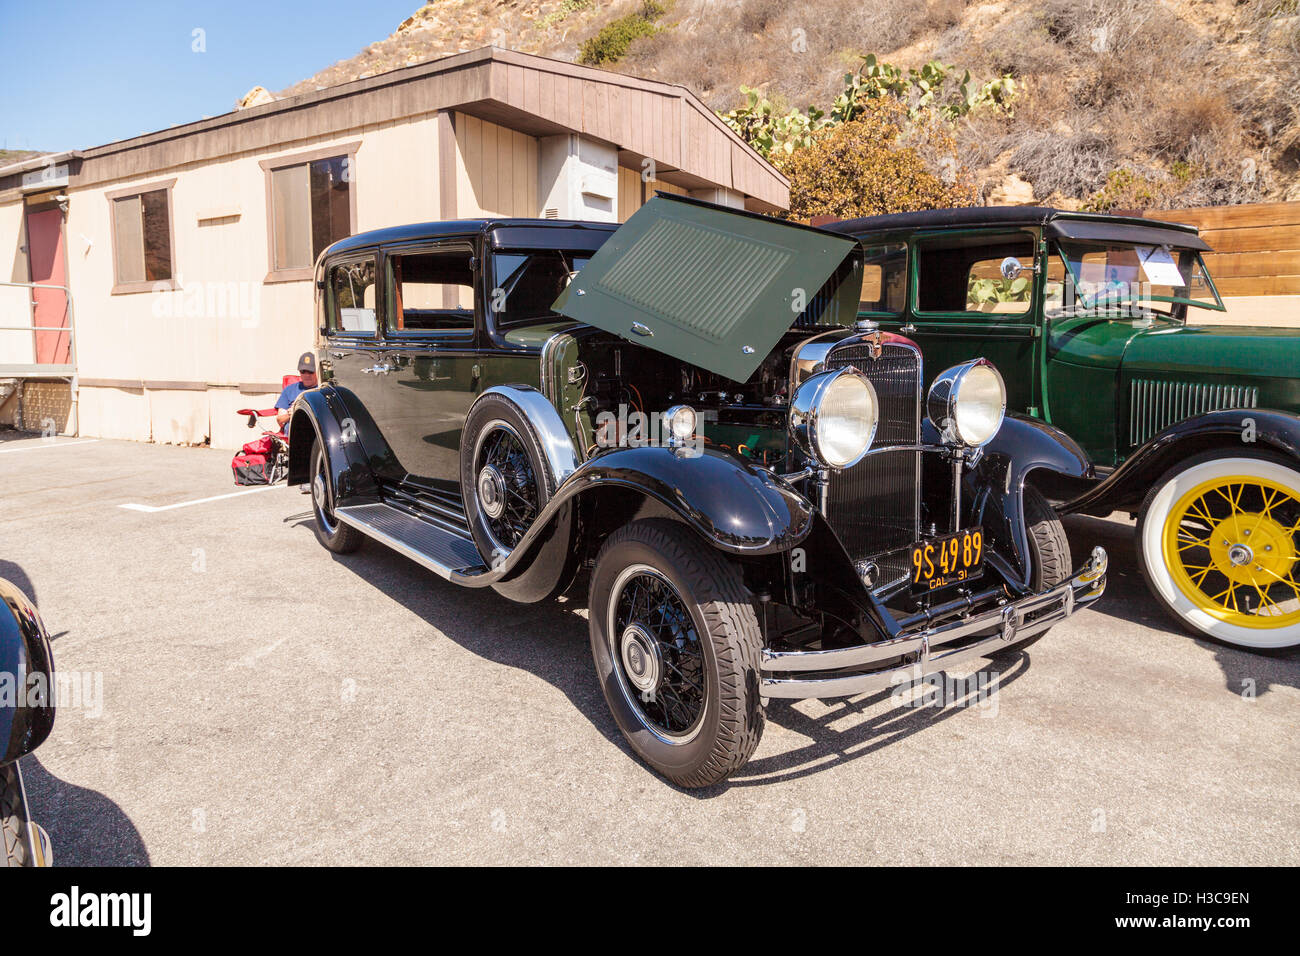 Laguna Beach, CA, USA - October 2, 2016: Green and black 1931 Nash 887 Sedan owned by Gary Marchetti and displayed at the Rotary Stock Photo